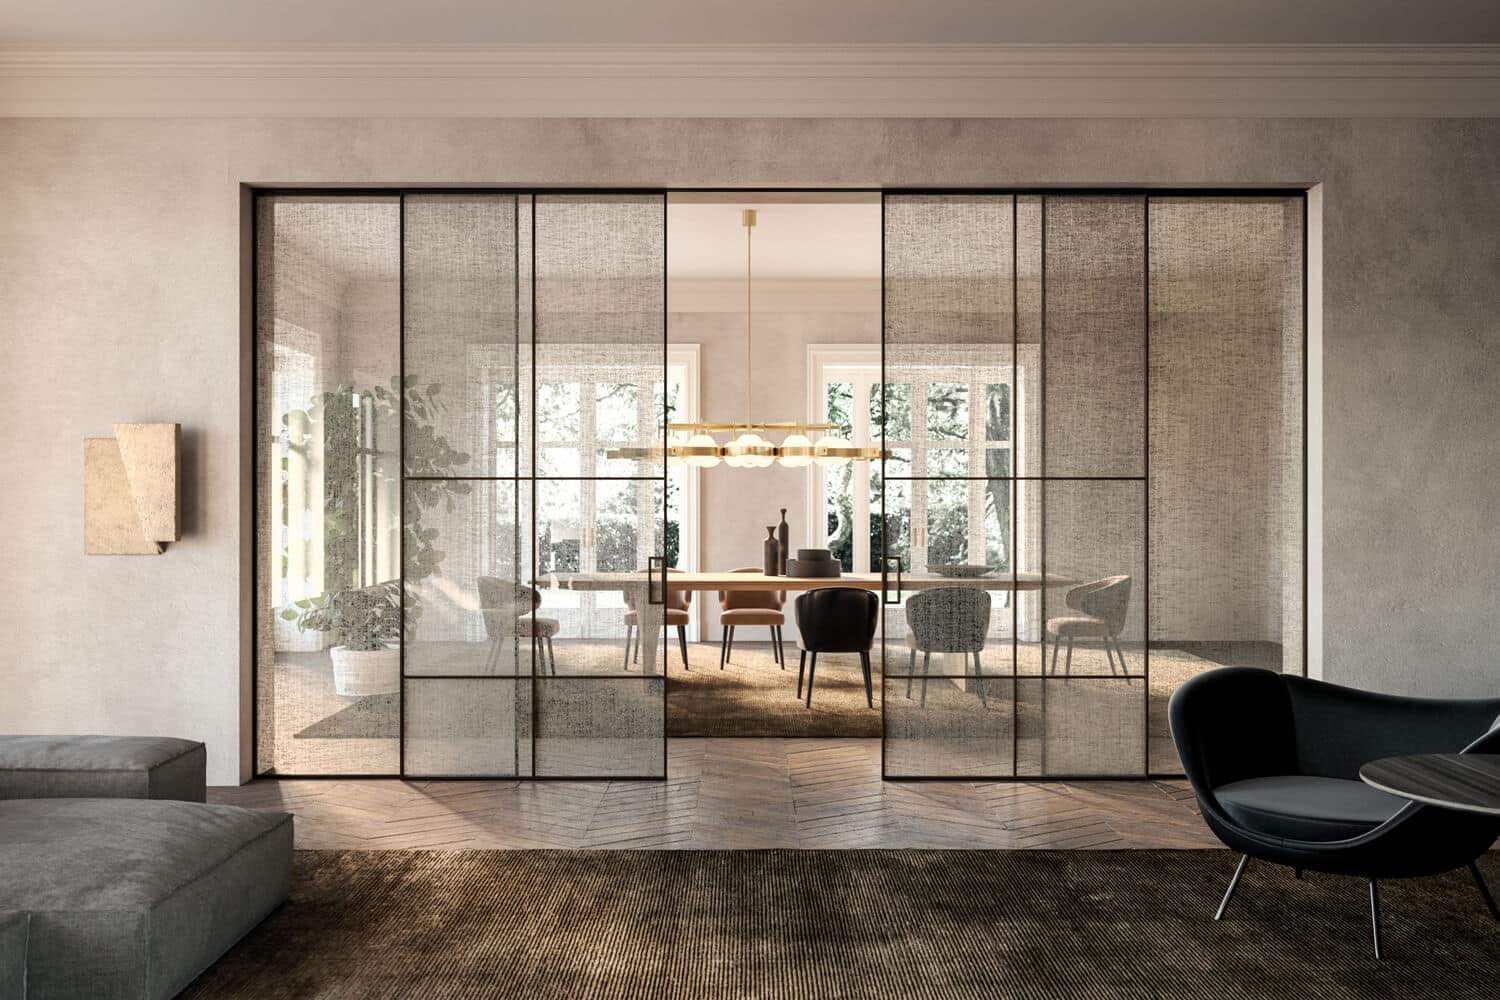 The feel of a room begins at its doors and with the Manhattan line, you can create the desired mood with just a few, very simple details. Shown: Clear glass with Grid 01, Lino decoration, and Moka finish.